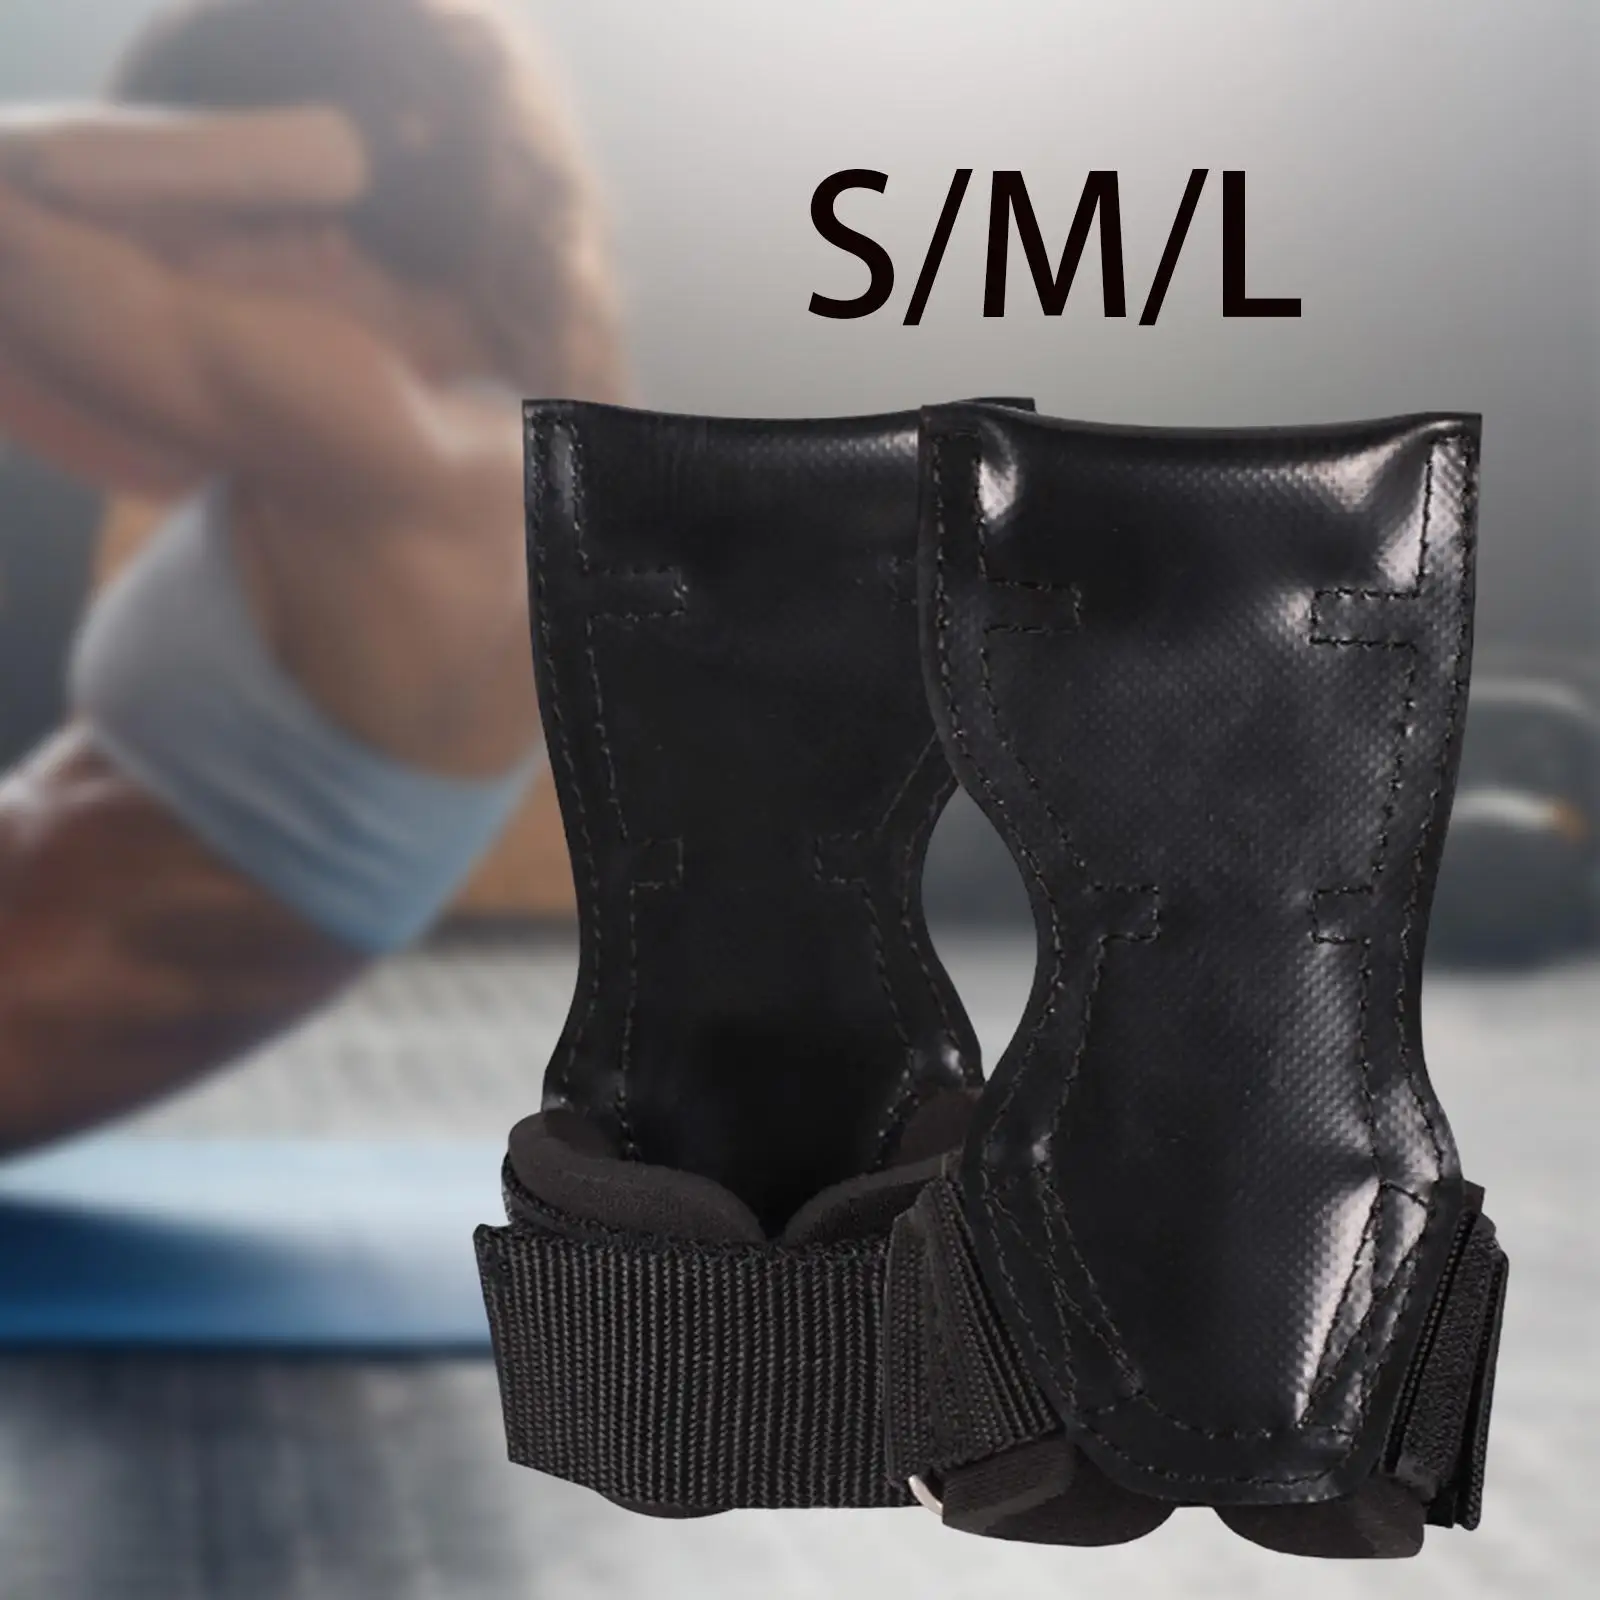 Weight Lifting Straps Deadlift Straps Workout Gloves for Bodybuilding Powerlifting Deadlifting Strength Training Kettlebell